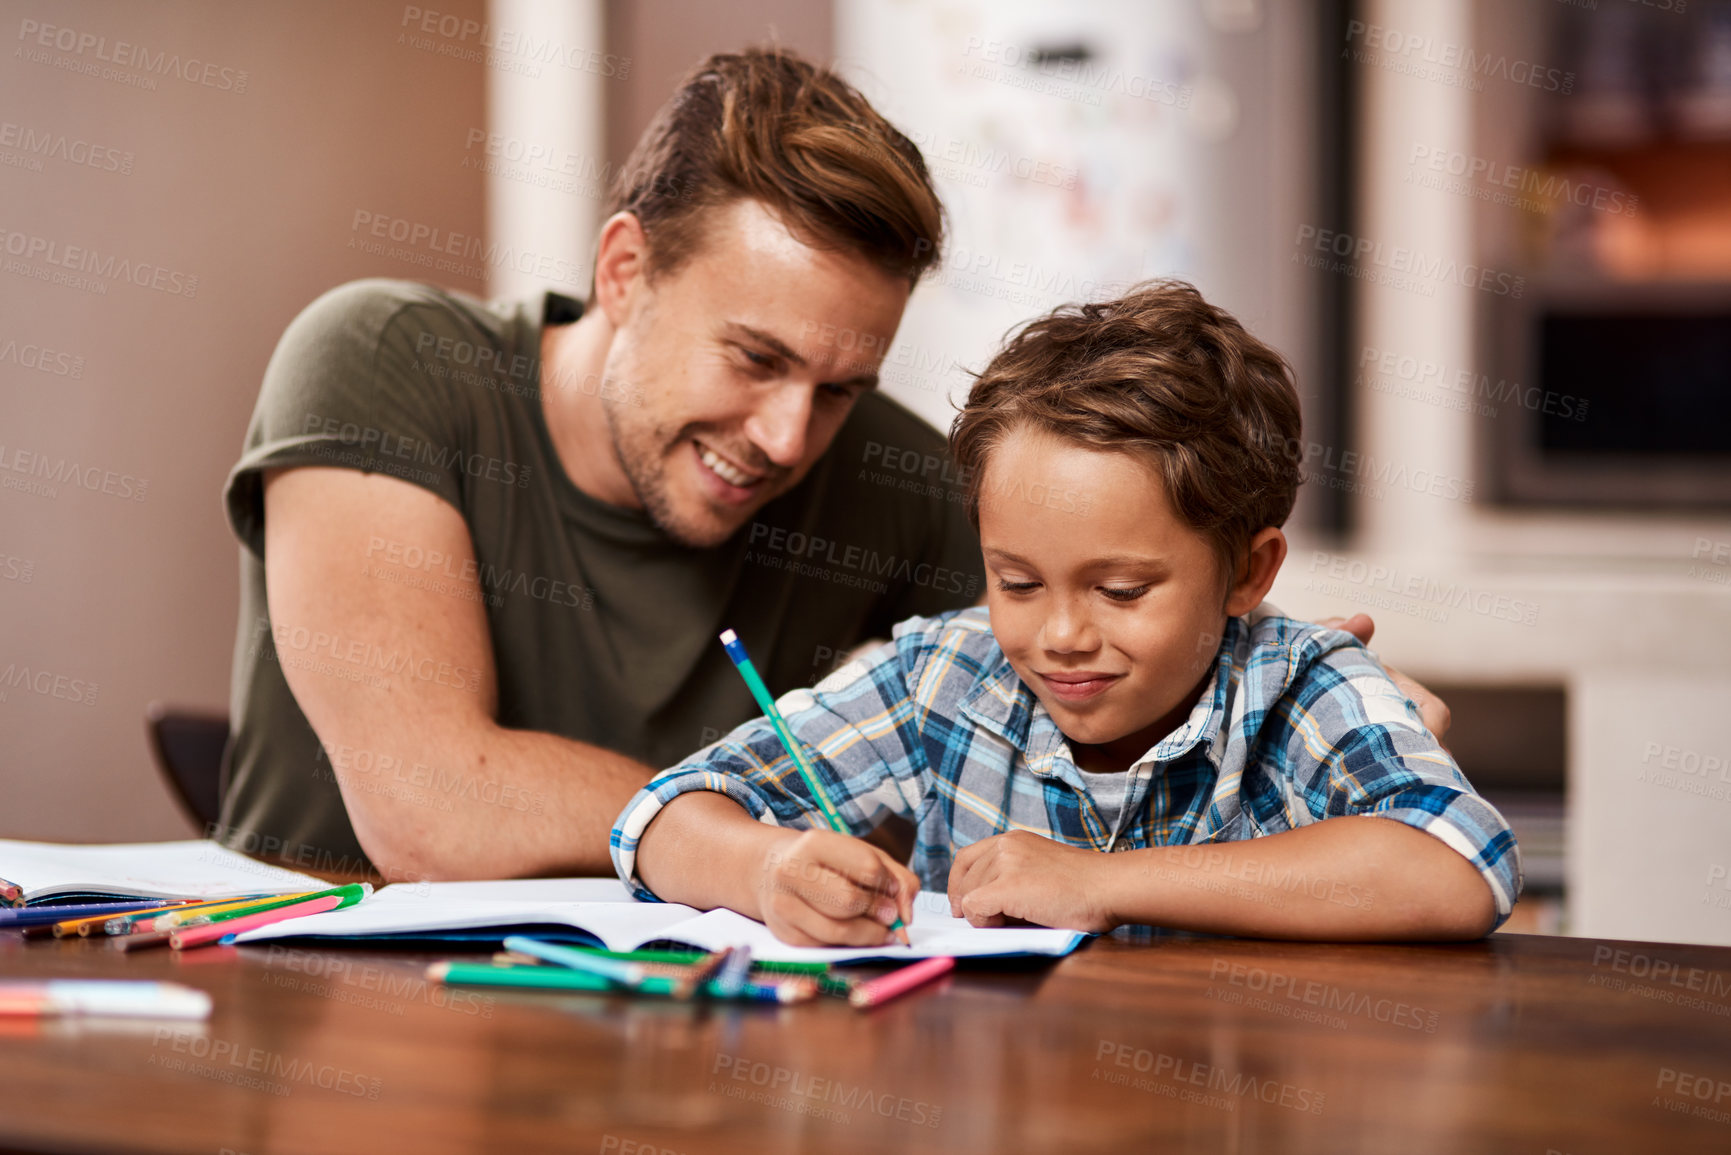 Buy stock photo Shot of a man sitting with his son while he does his homework